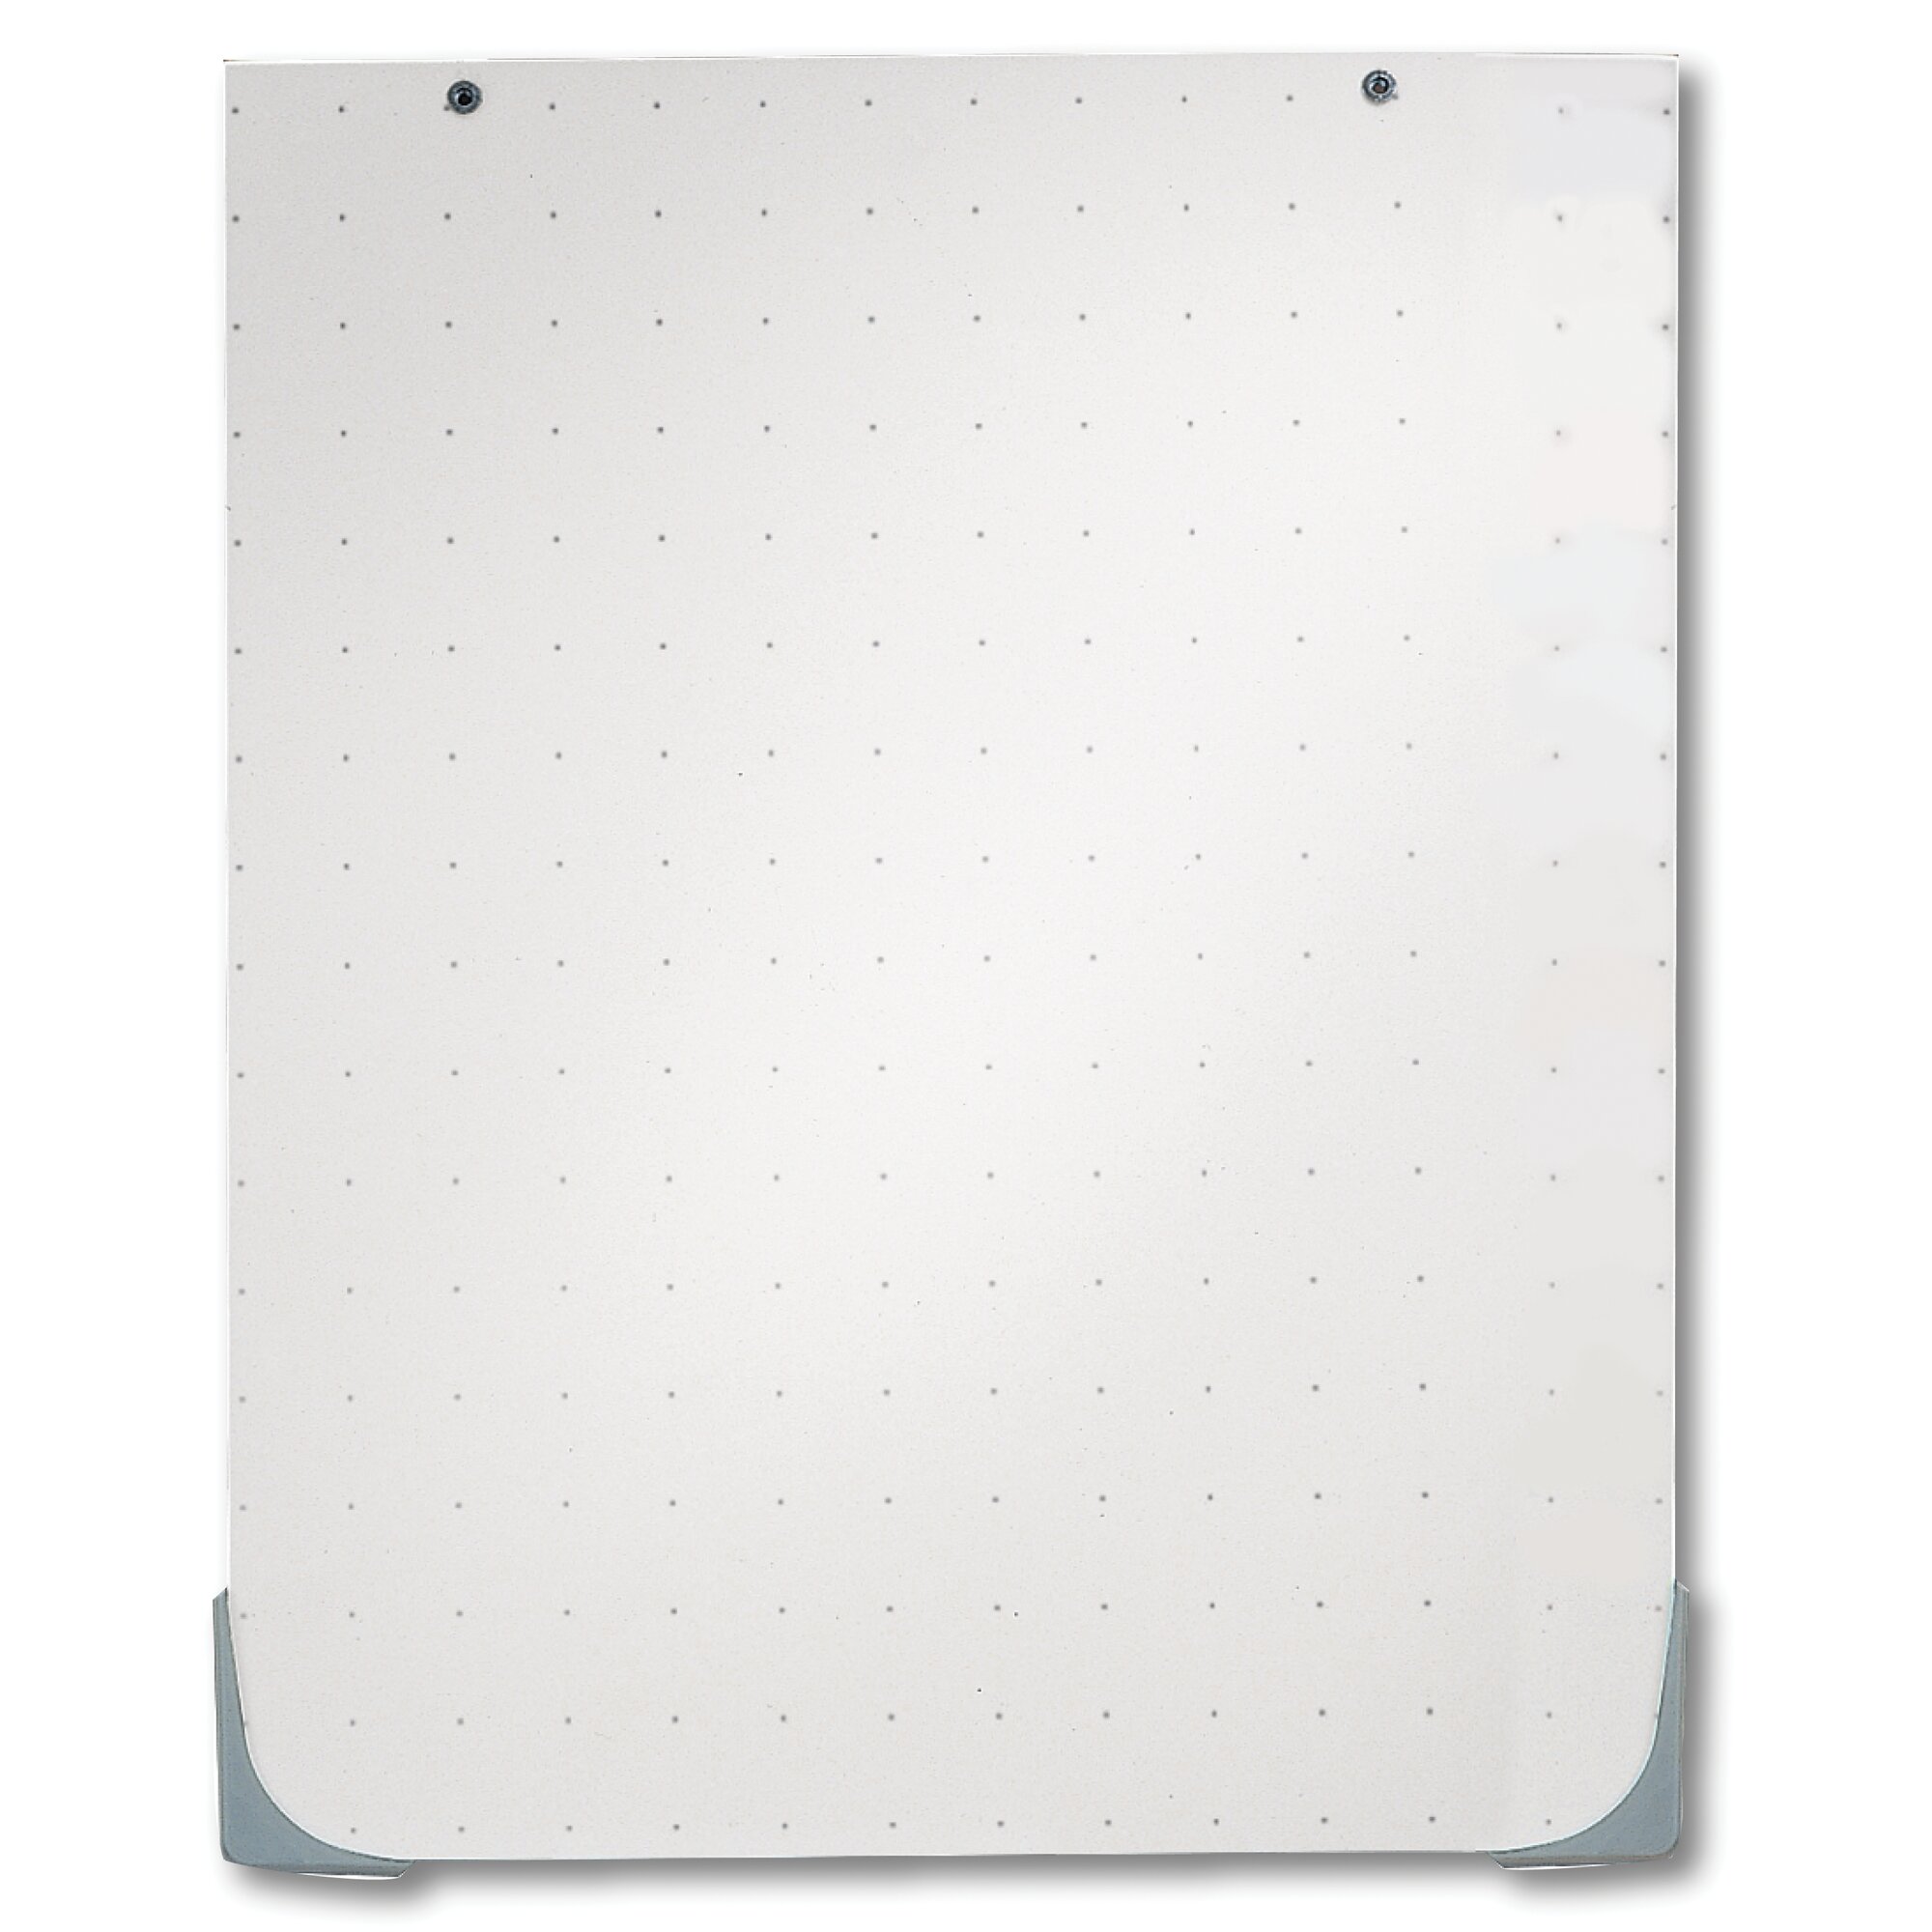 Quartet DuraMax Total Erase Whiteboard Accessory, For Easels, 27" x 34" - image 1 of 5